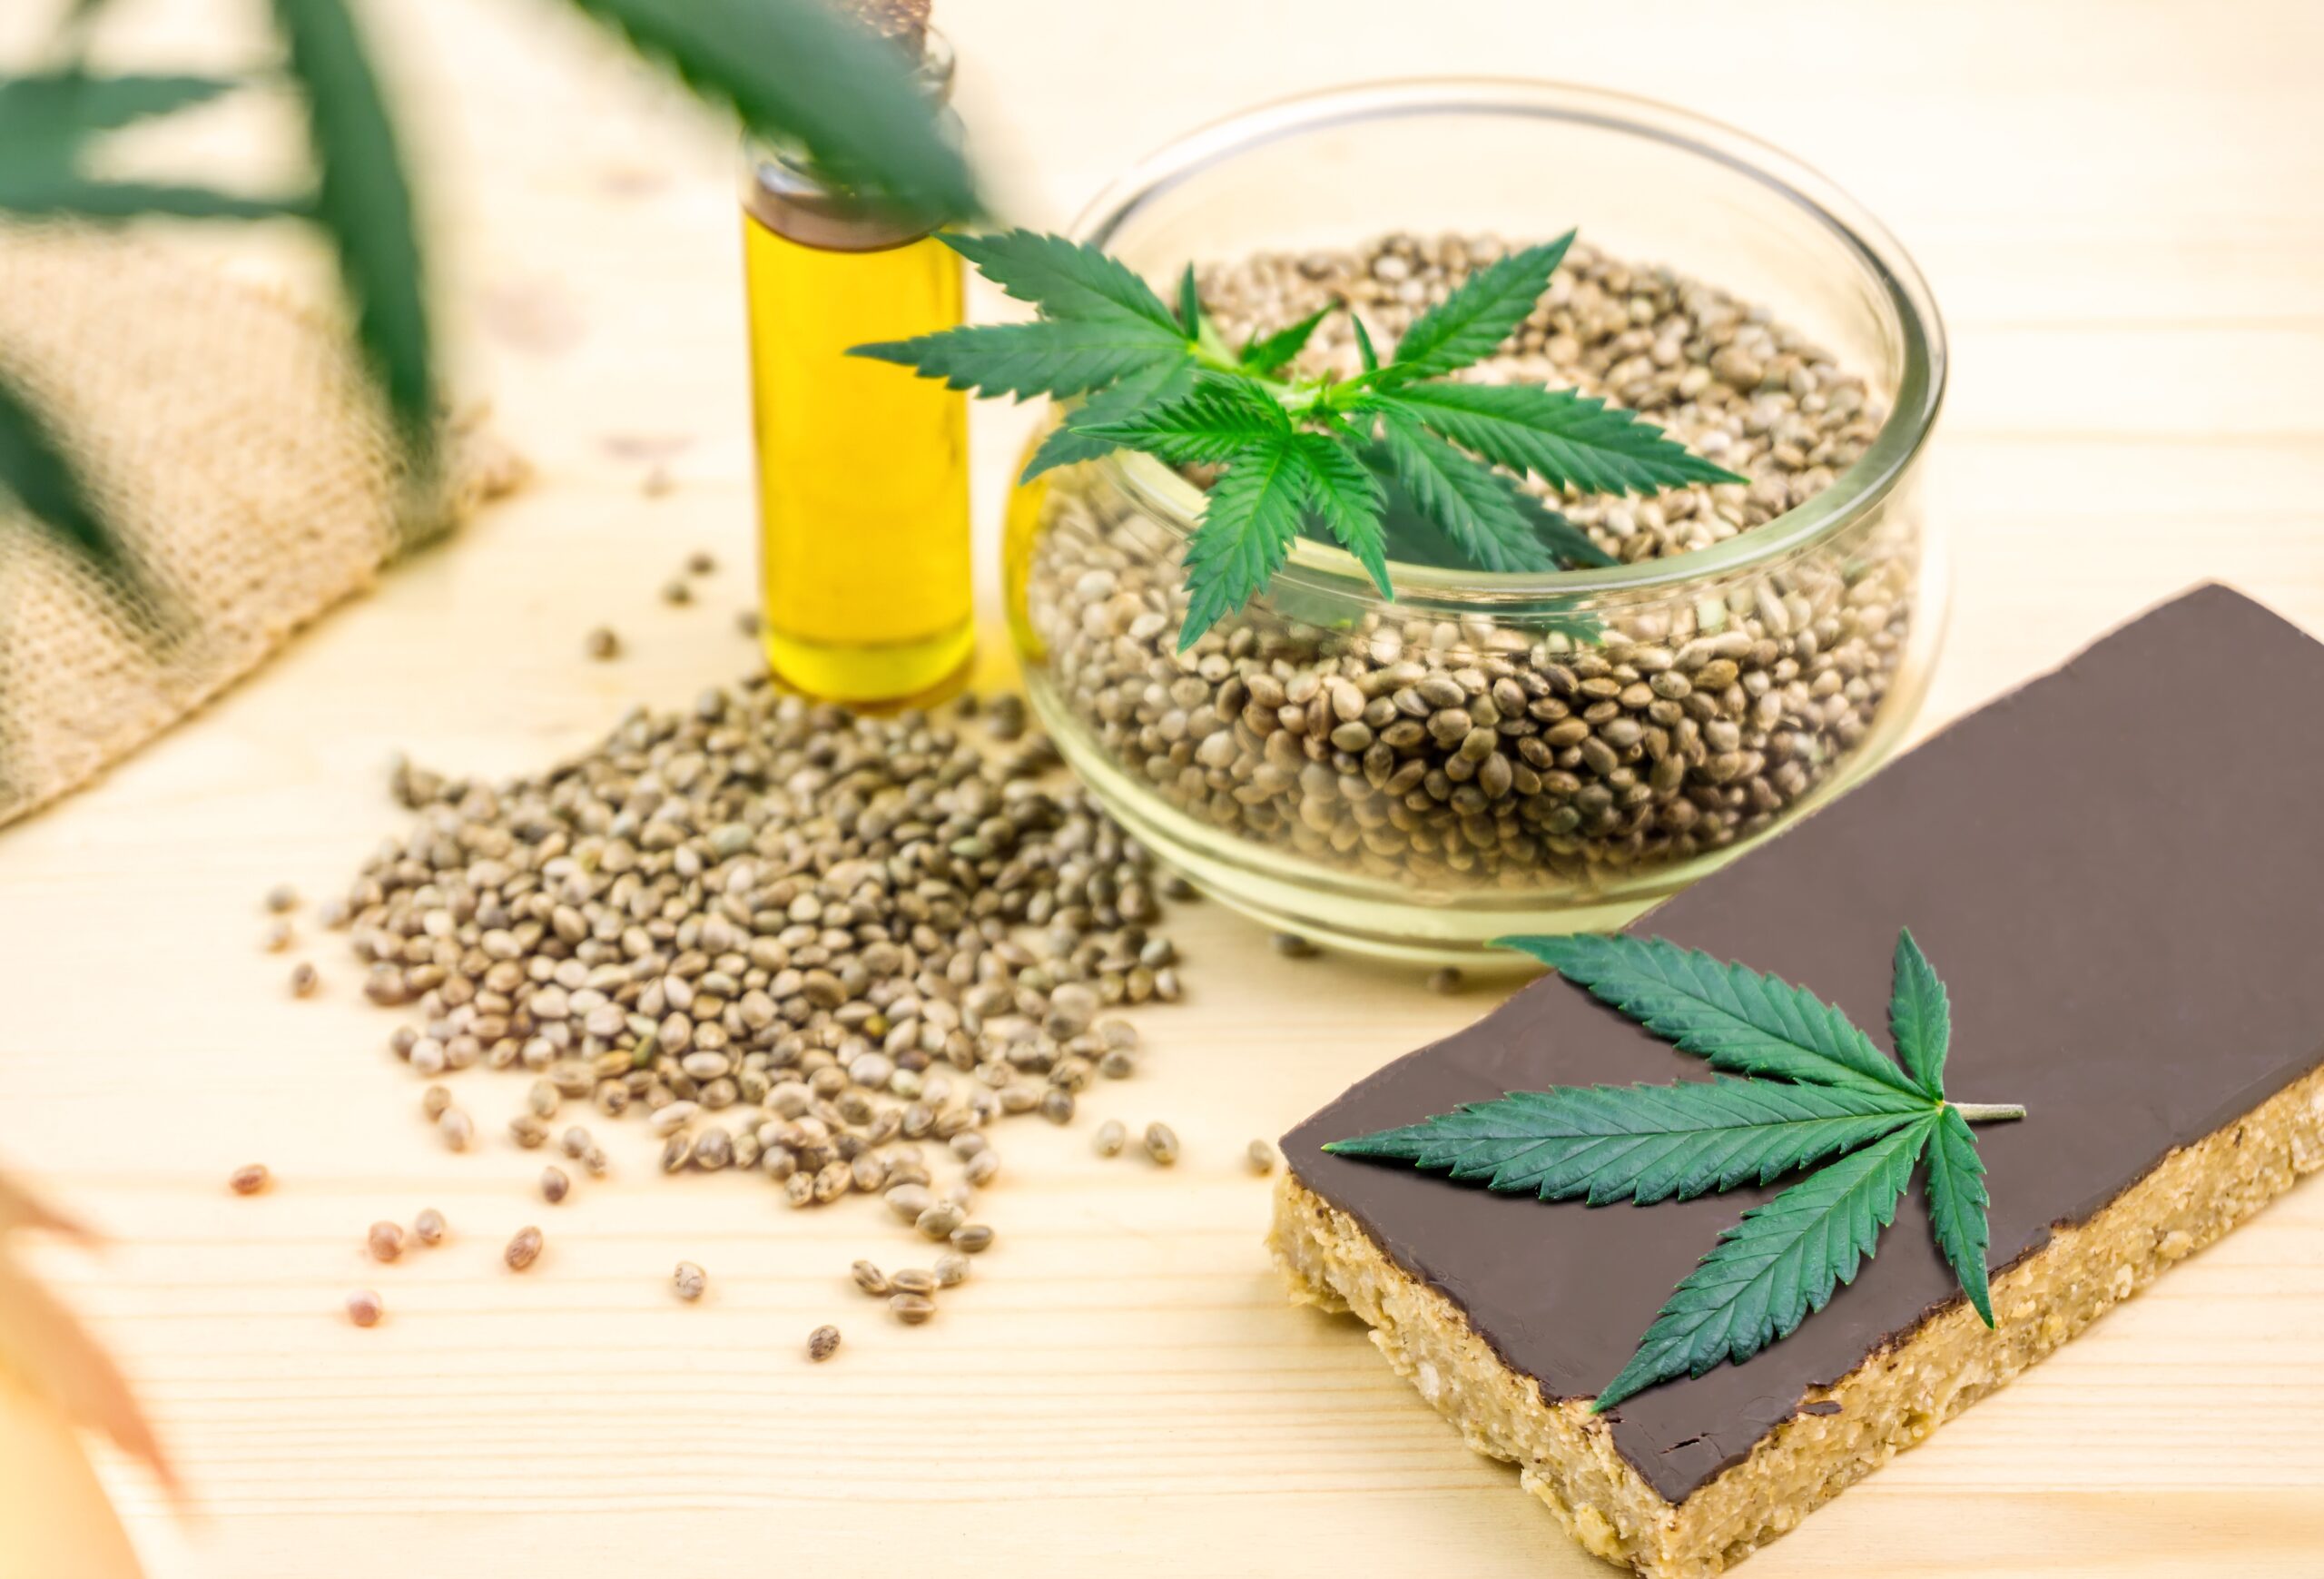 cannabis-seeds-in-bowl-oil-and-hemp-seed-cereal-ba